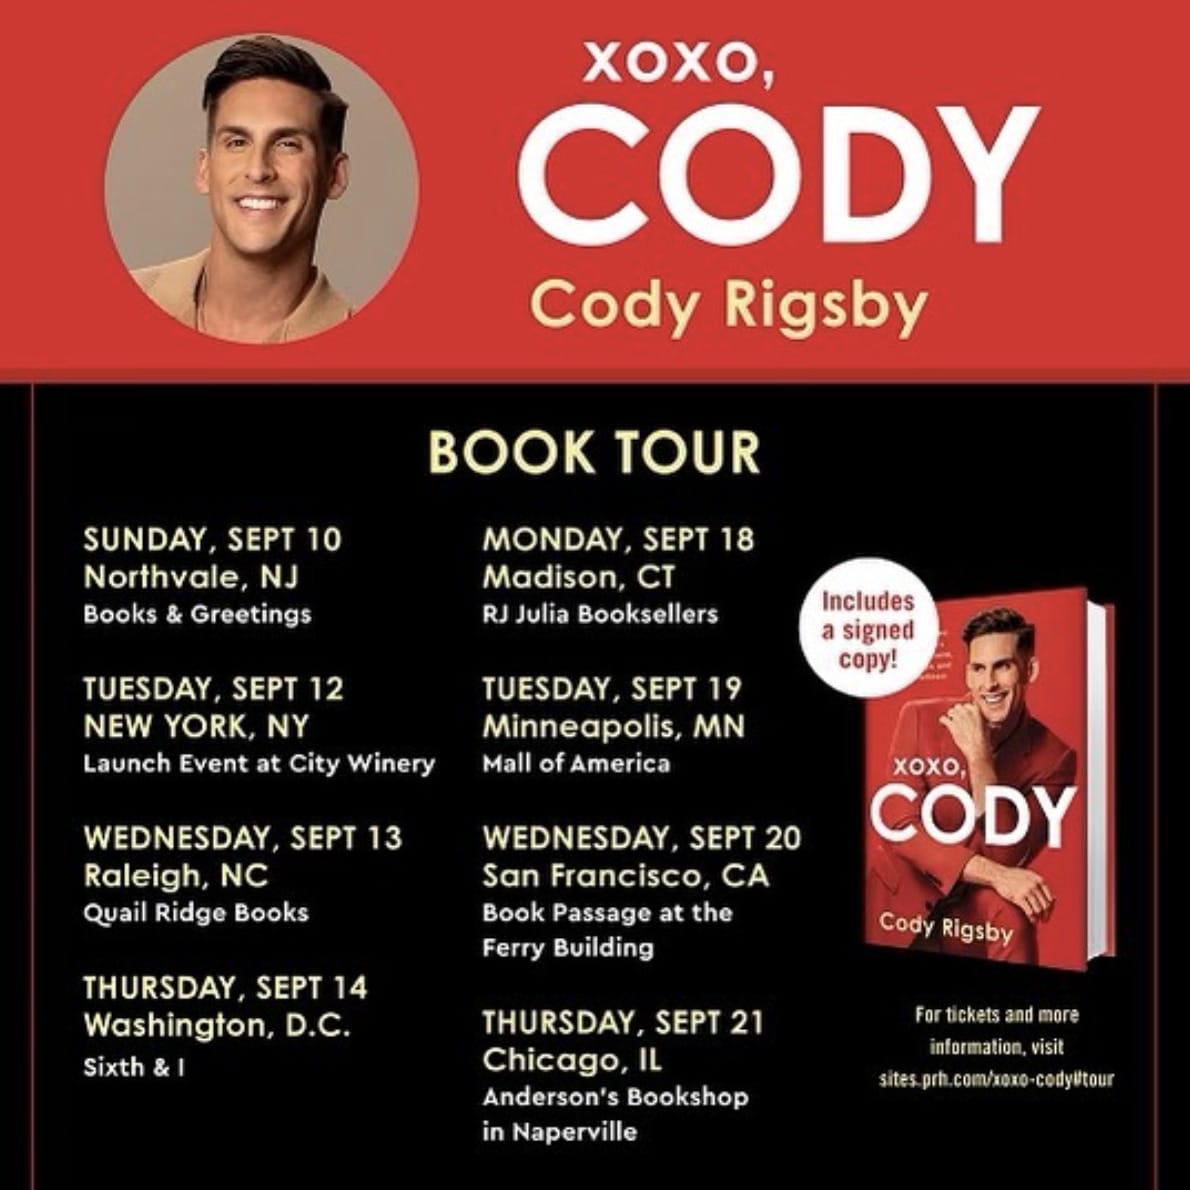 Cody Rigsby book tour dates. Image credit Cody's social media.